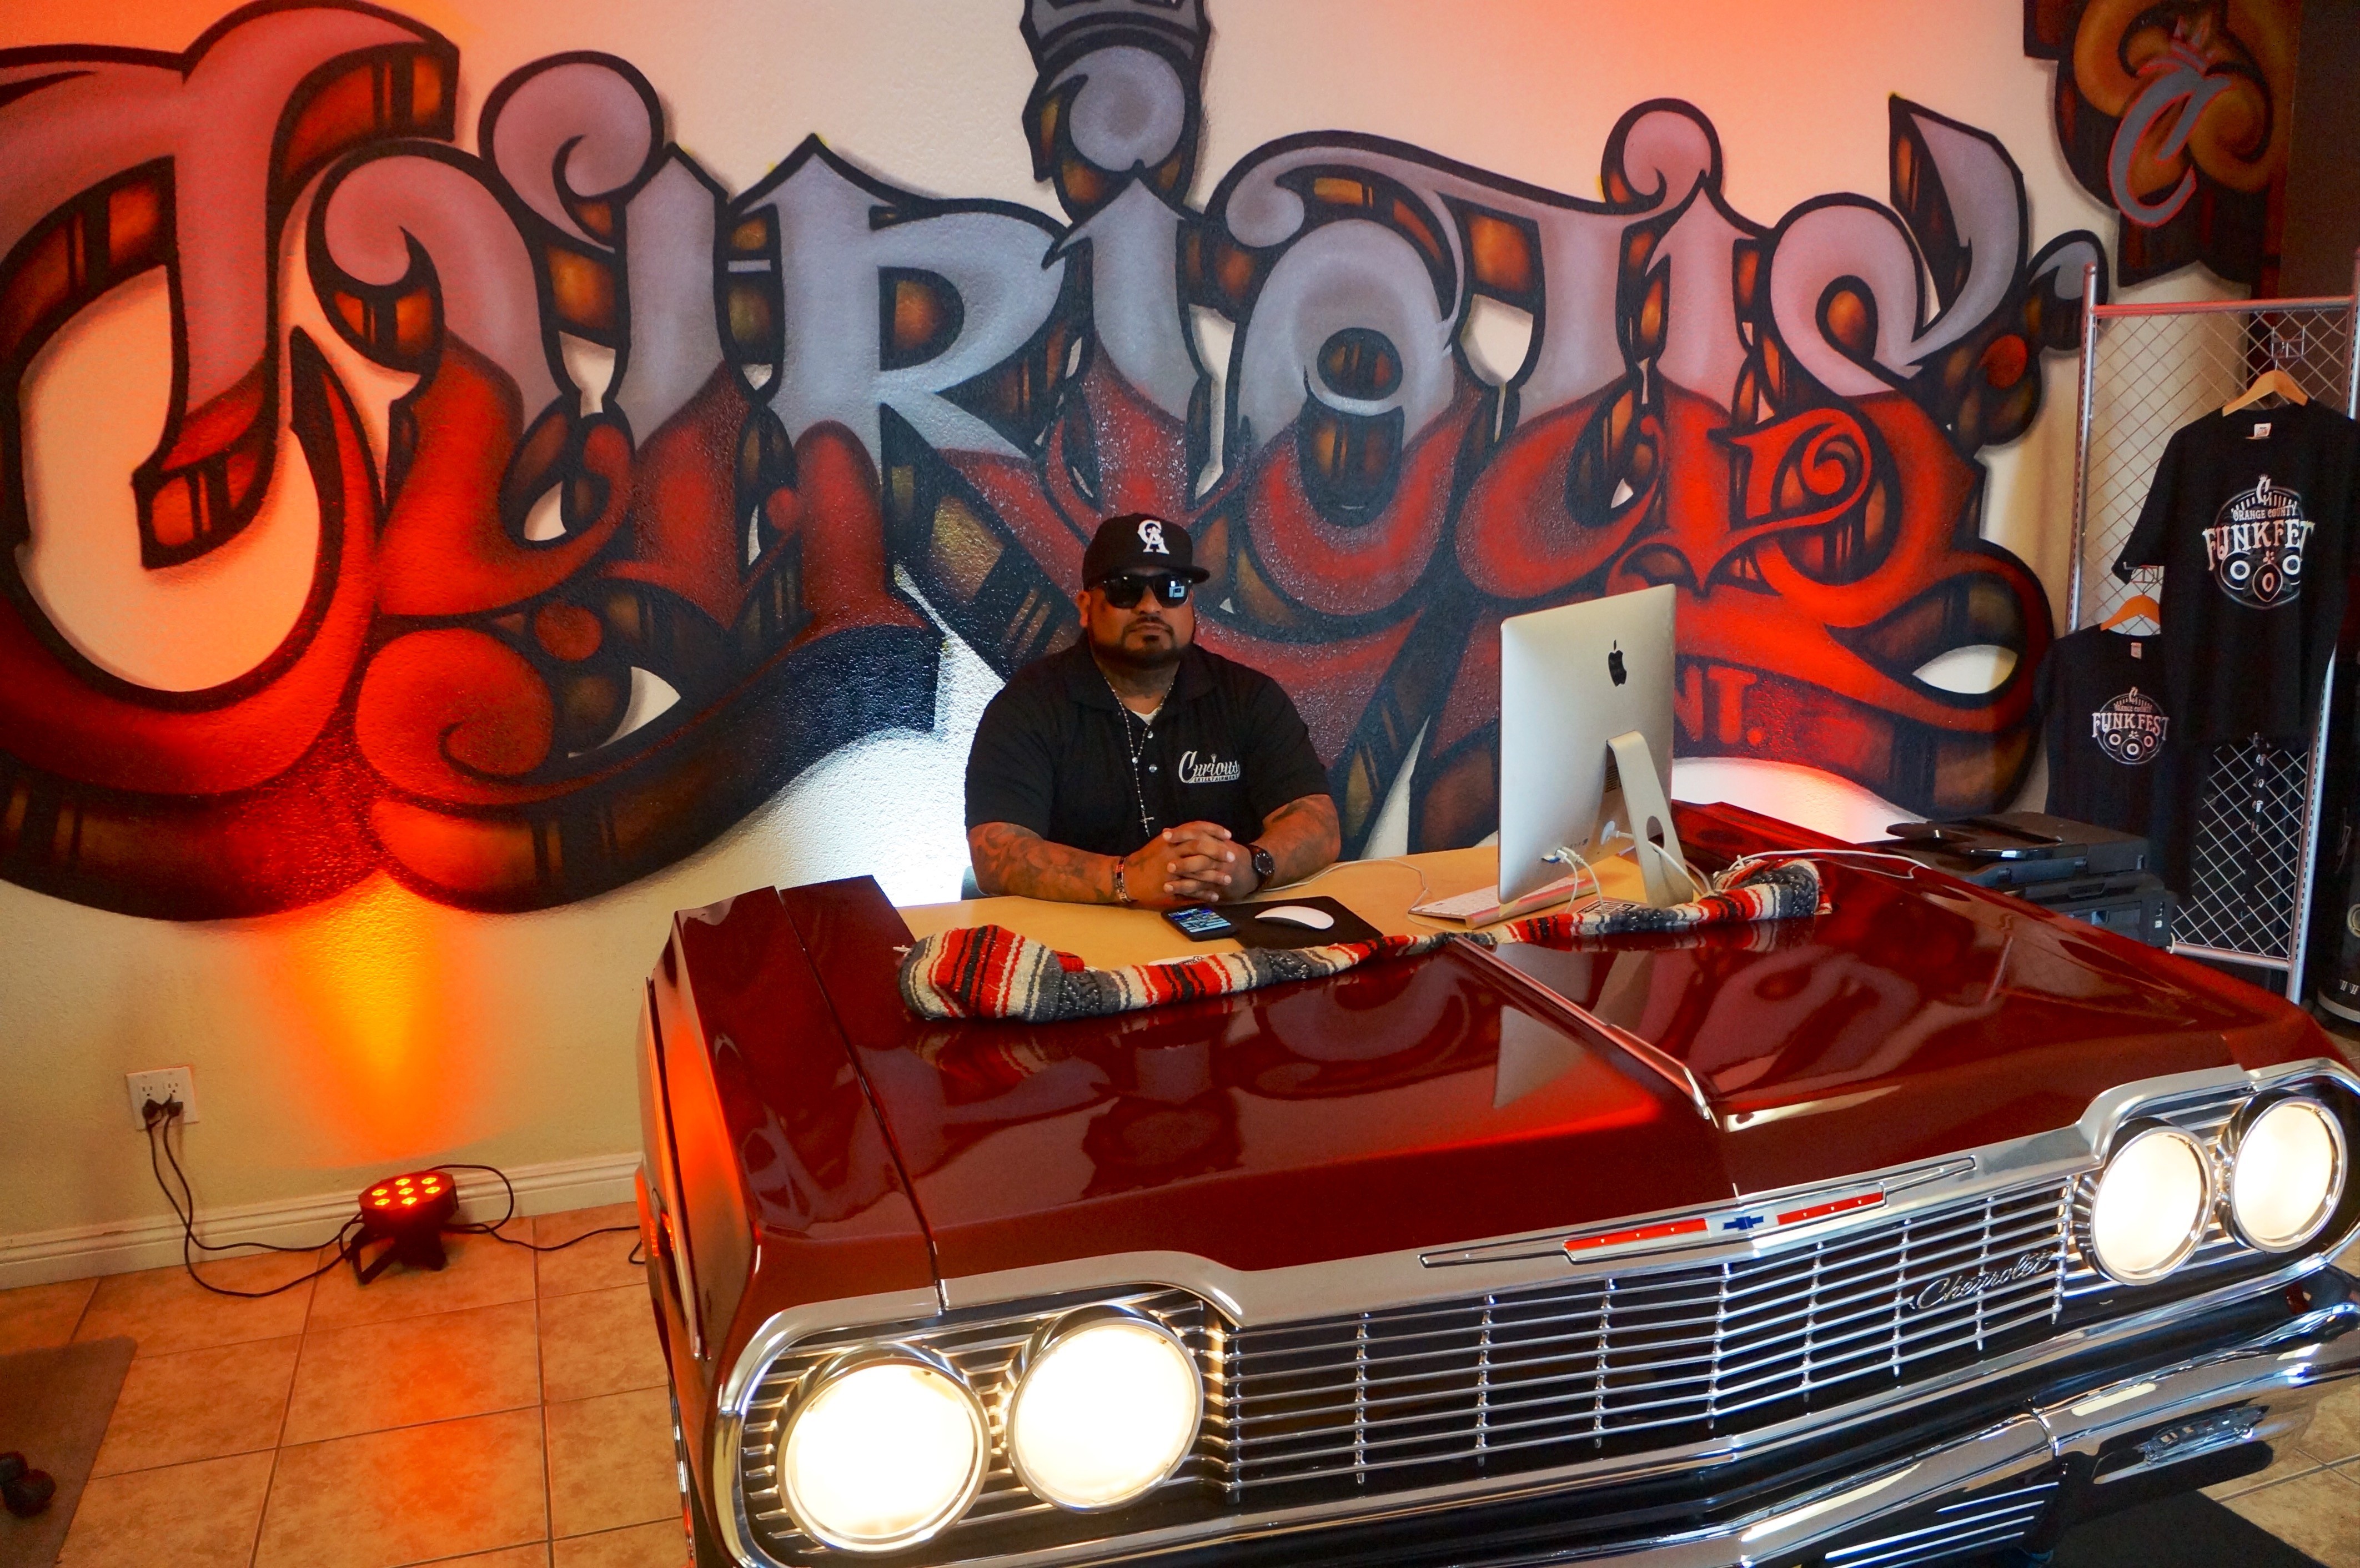 Firme Sunday Celebrates The Lowrider Lifestyle In The Heart Of